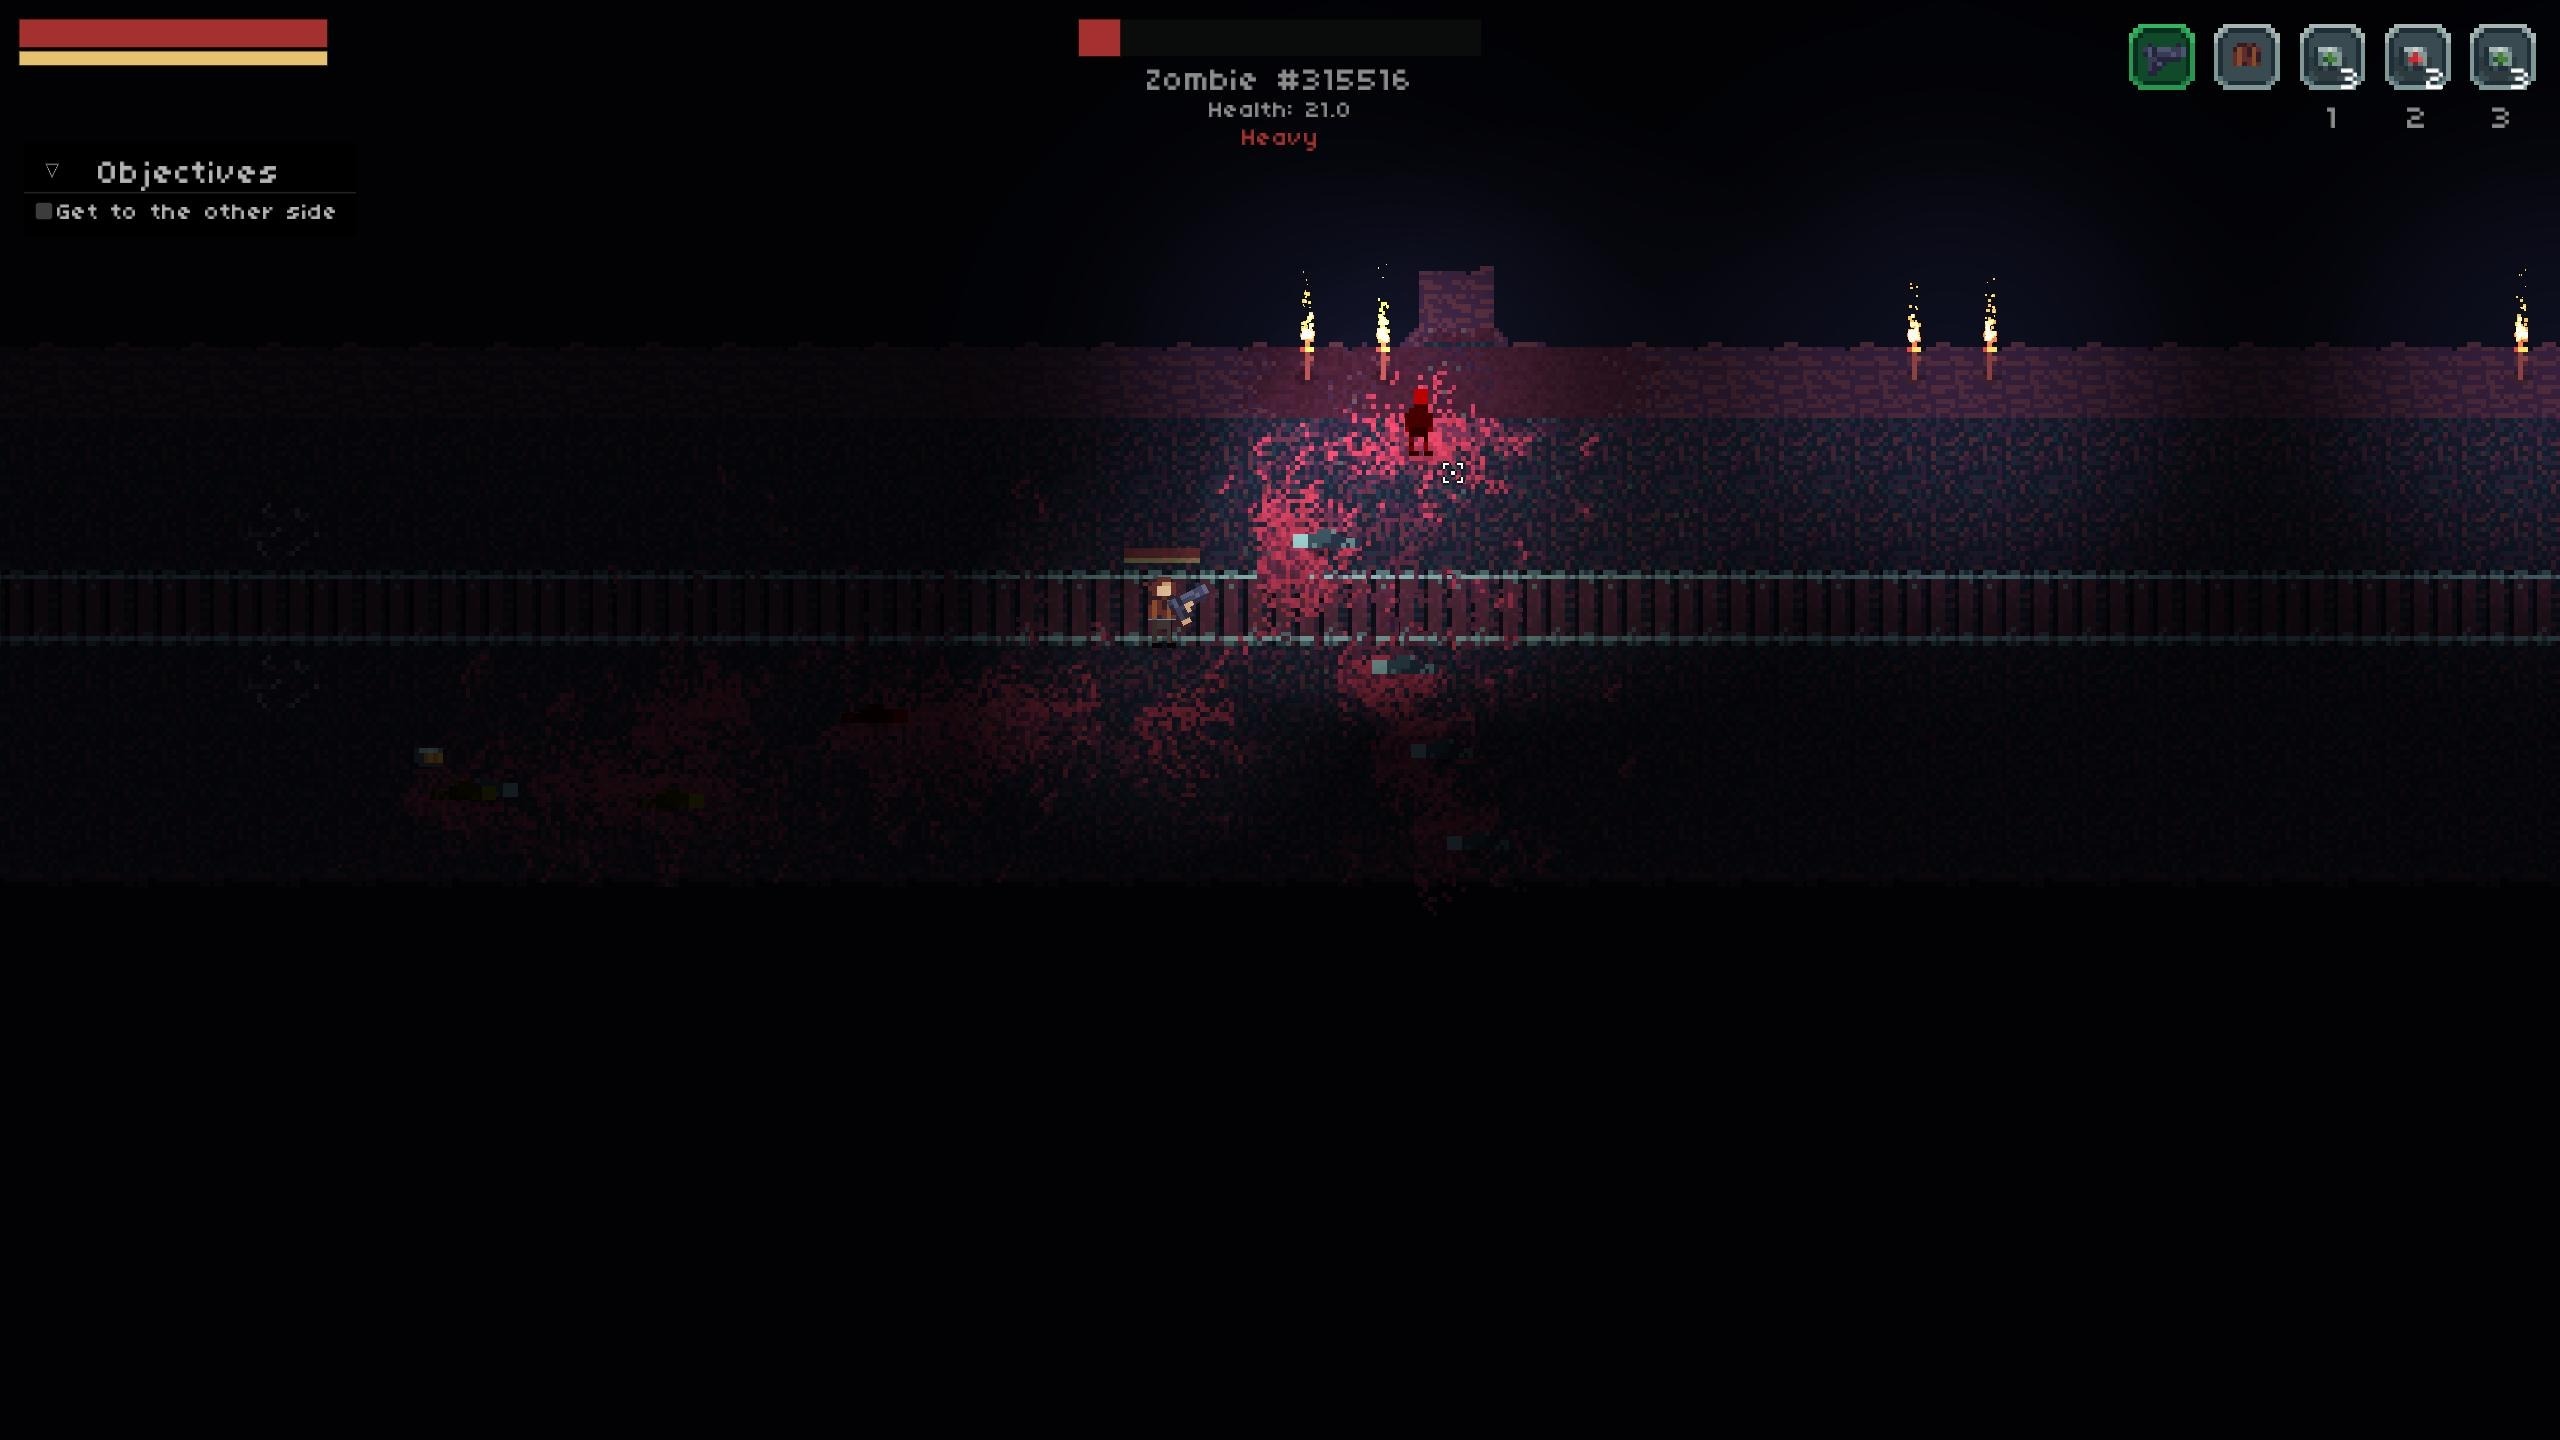 Gameplay screenshot with lots of zombies in a tunnel